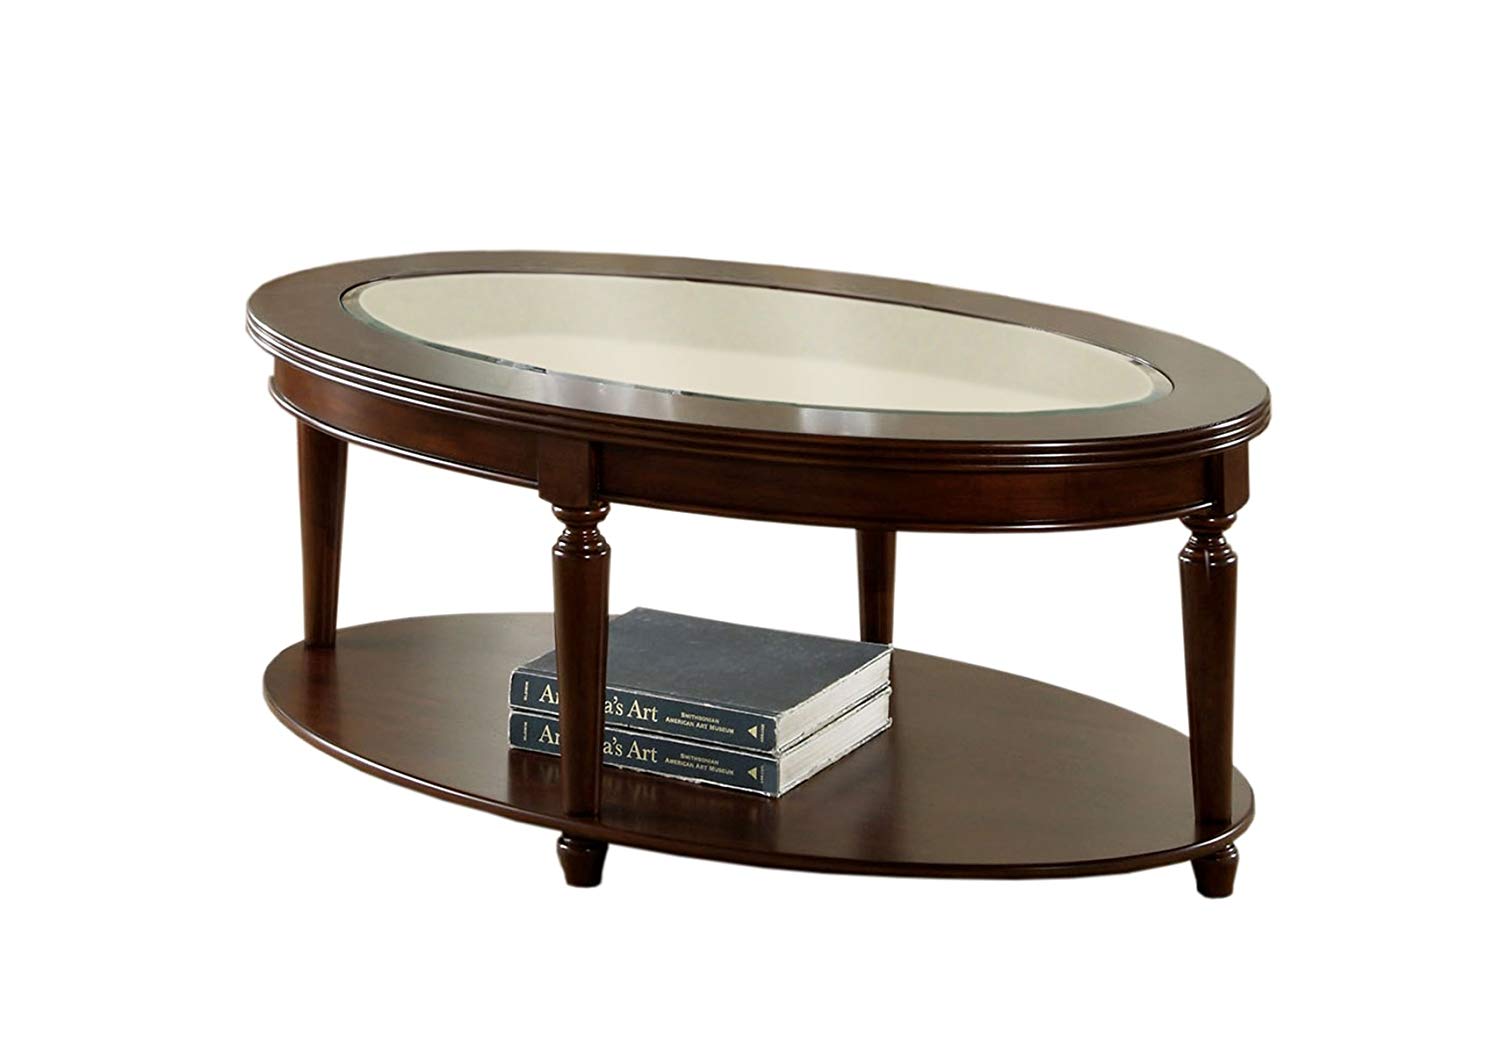 buffet furniture probably super great oval wood end table america claire glass top coffee ijbl dark cherry finish kitchen dining magazine tables with drawers pottery barn ott